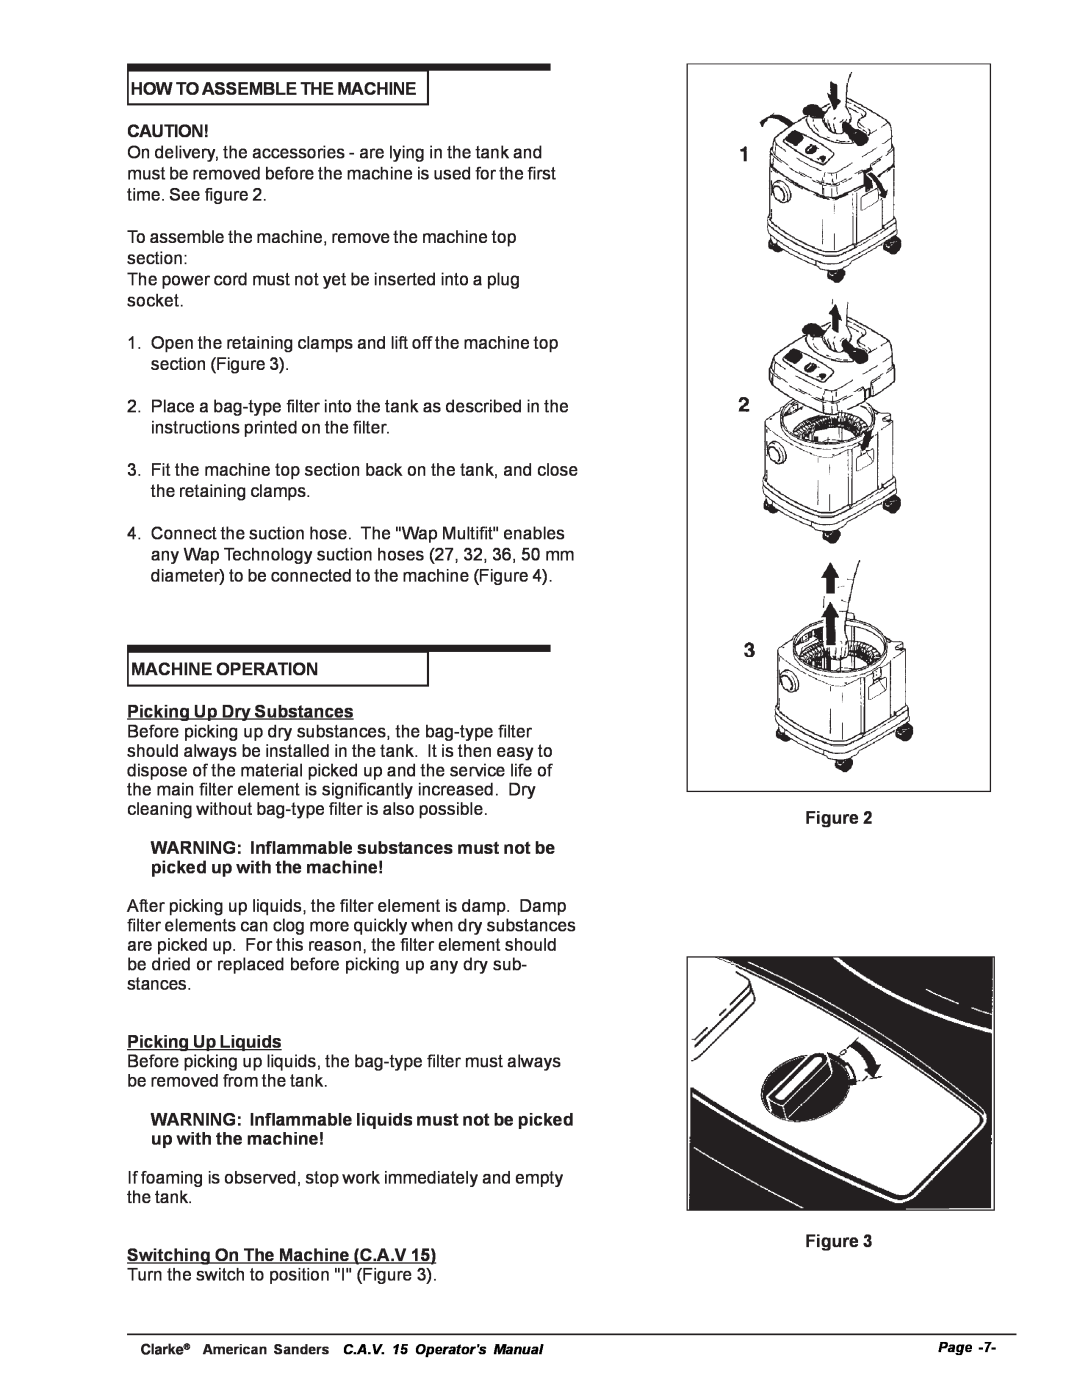 Nilfisk-ALTO C.A.V. 15 manual How To Assemble The Machine, MACHINE OPERATION Picking Up Dry Substances, Picking Up Liquids 